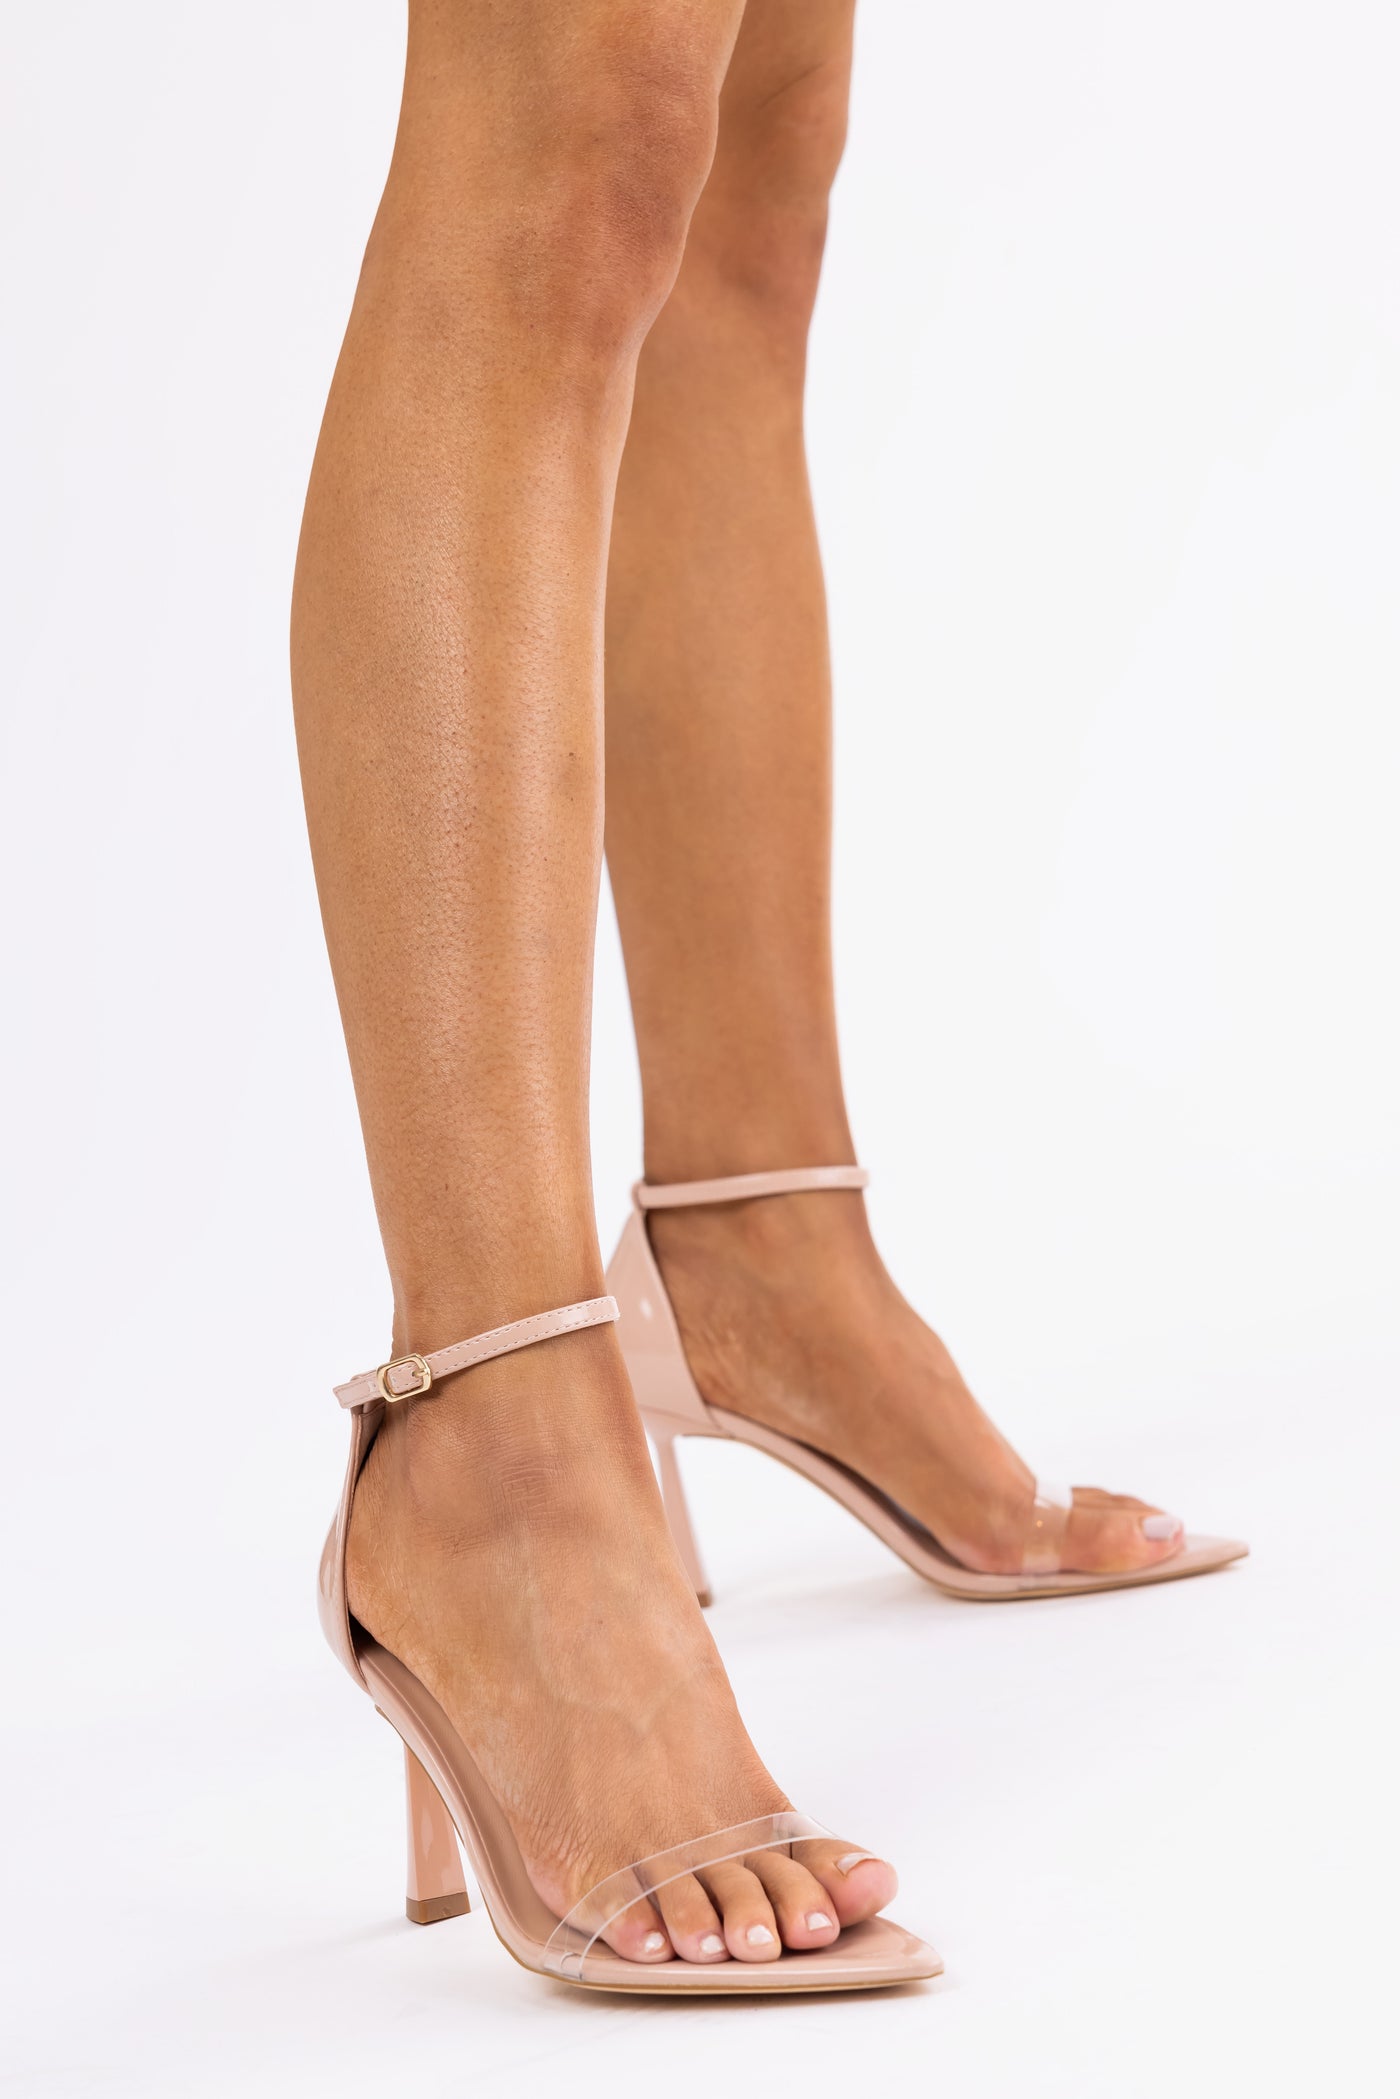 Peach Pointed Toe Ankle Strap Heels